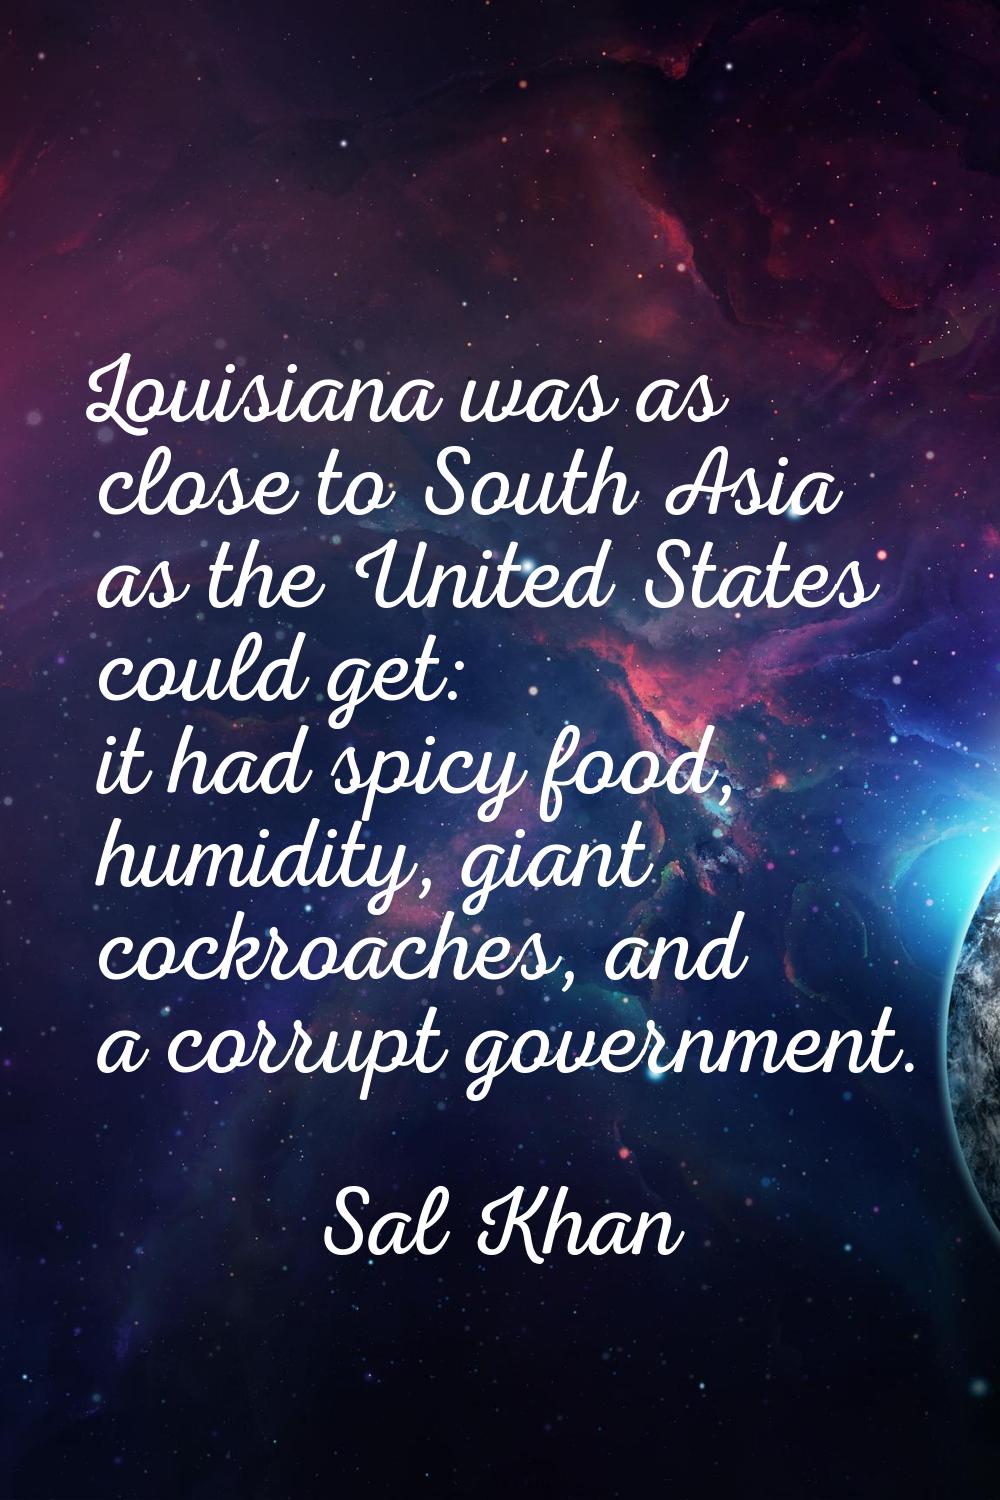 Louisiana was as close to South Asia as the United States could get: it had spicy food, humidity, g